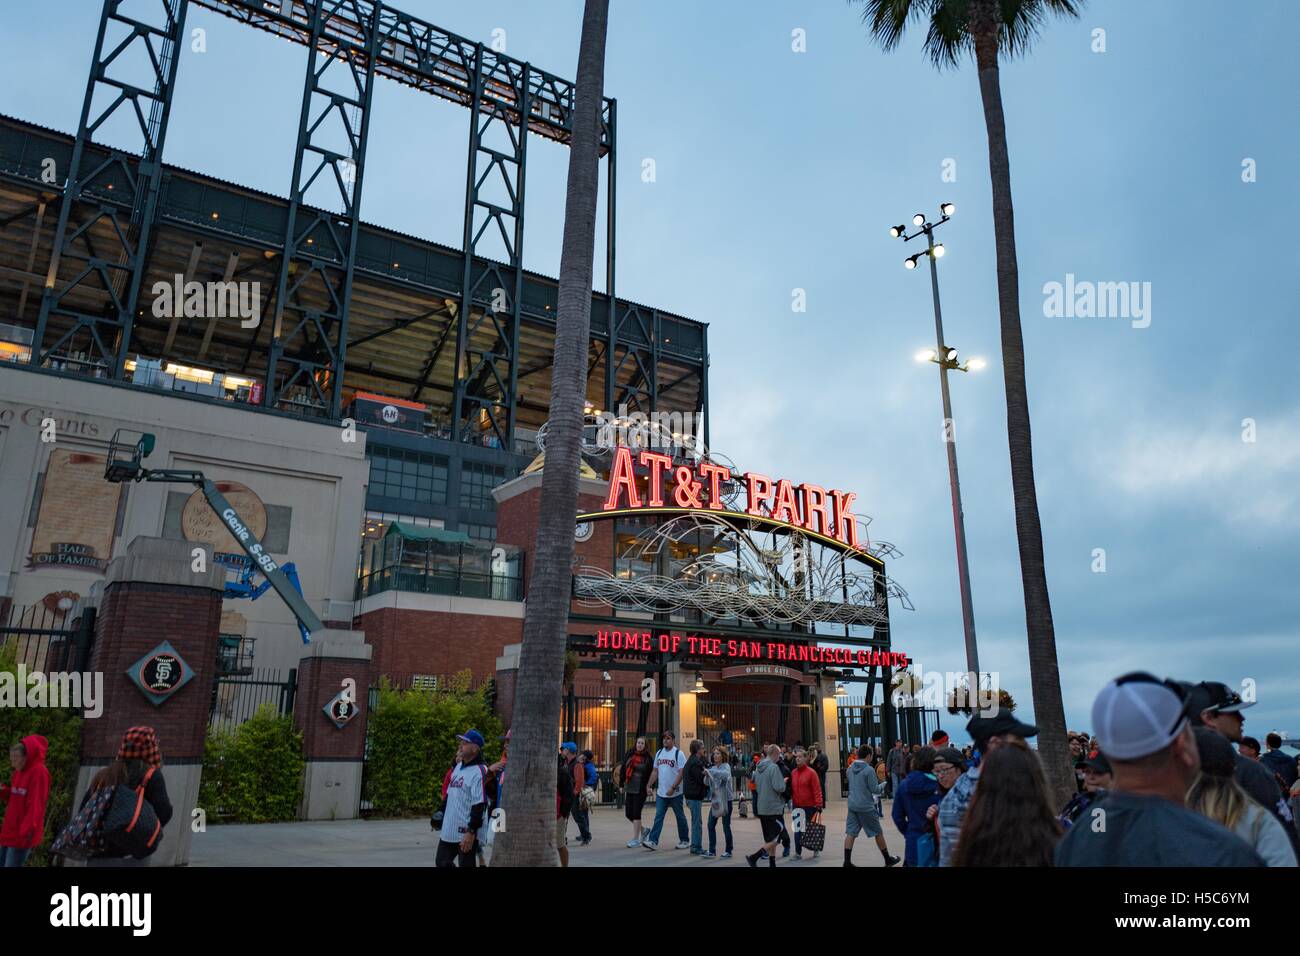 San Francisco, California, United States - August 21, 2016:  A crowd of people walking in front of a building at AT&T Park, San Stock Photo